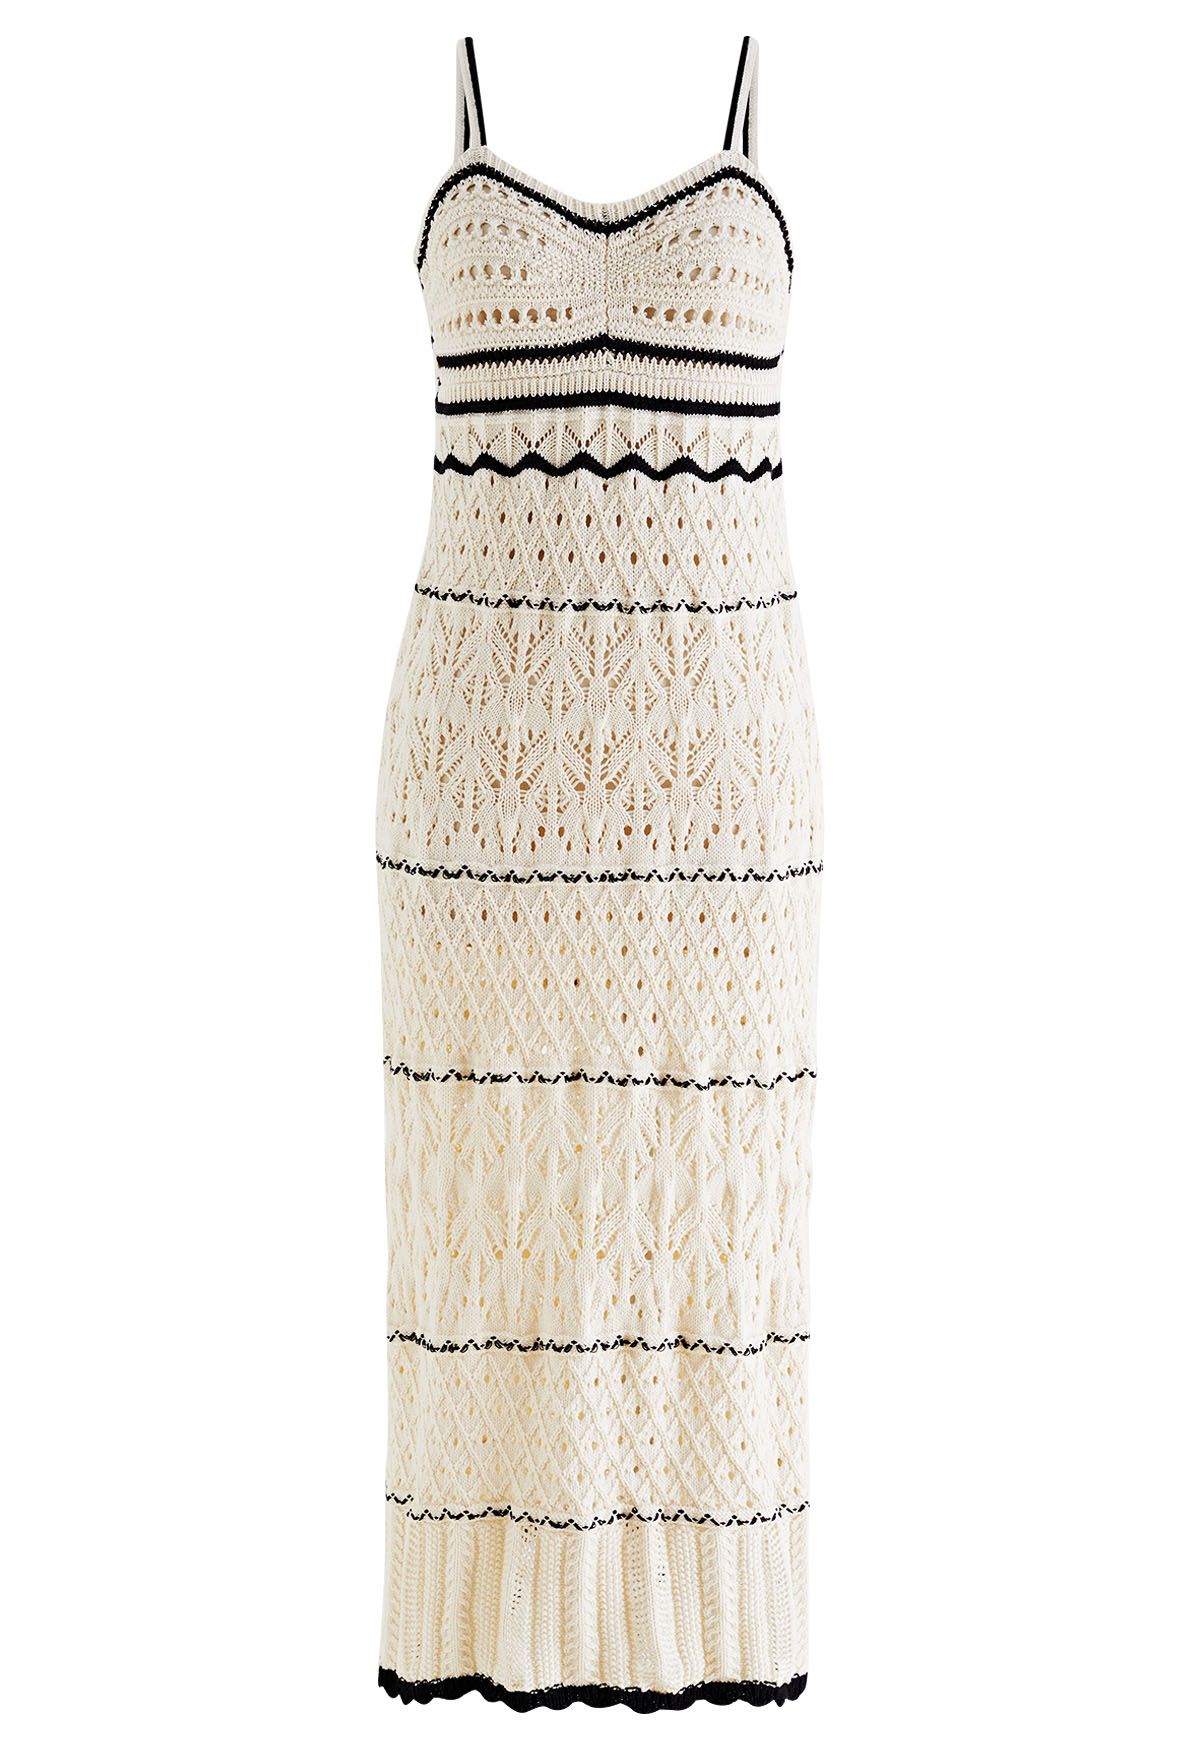 Contrast Lines Hollow Out Knit Cami Dress